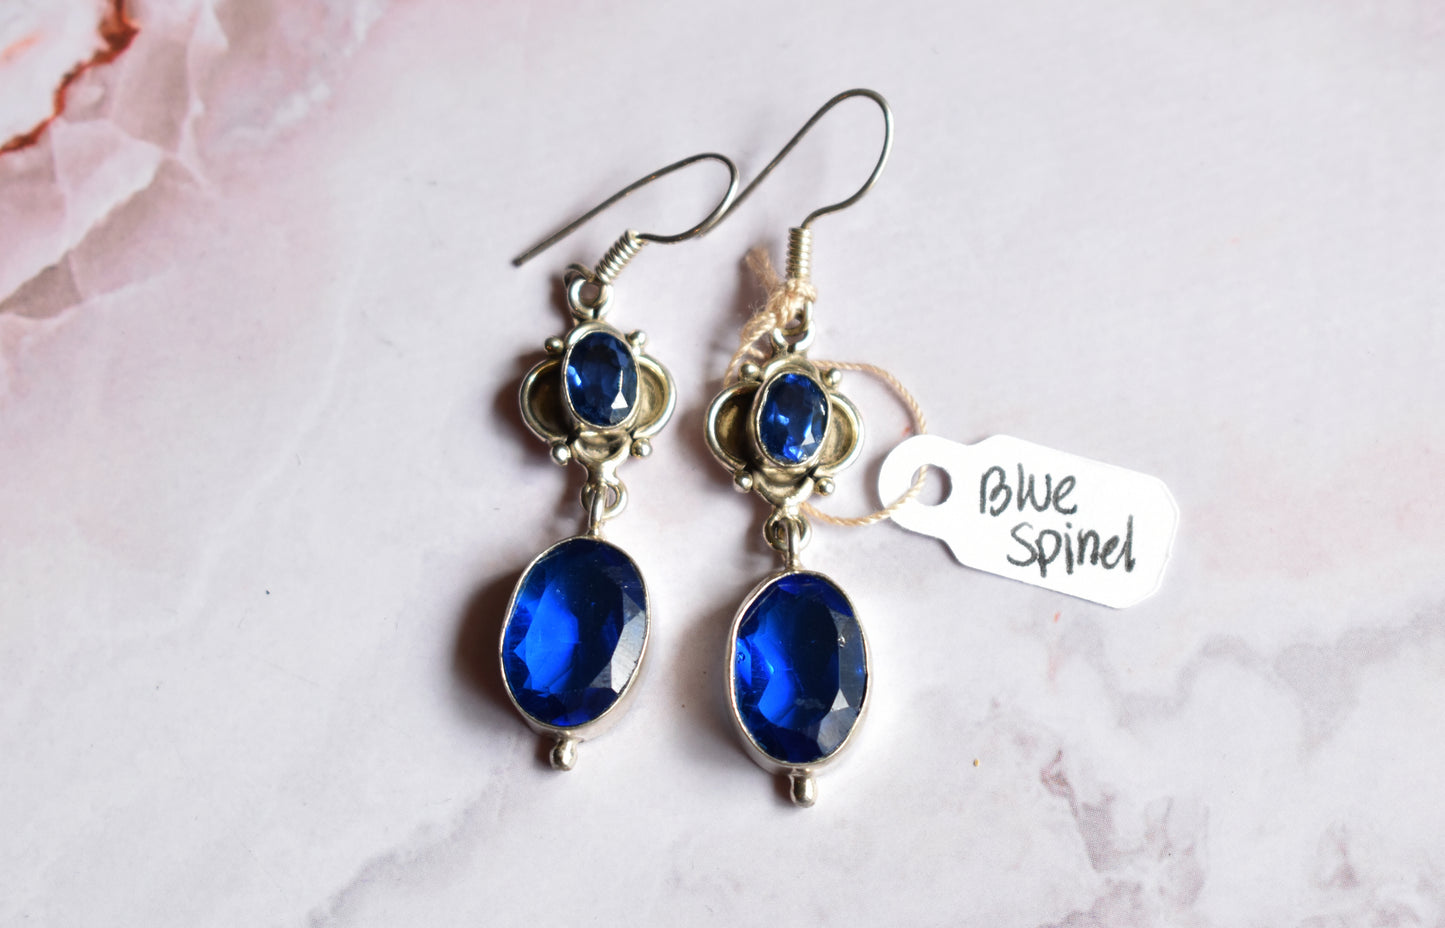 stones-of-transformation - Blue-Spinel Earrings - Stones of Transformation - 